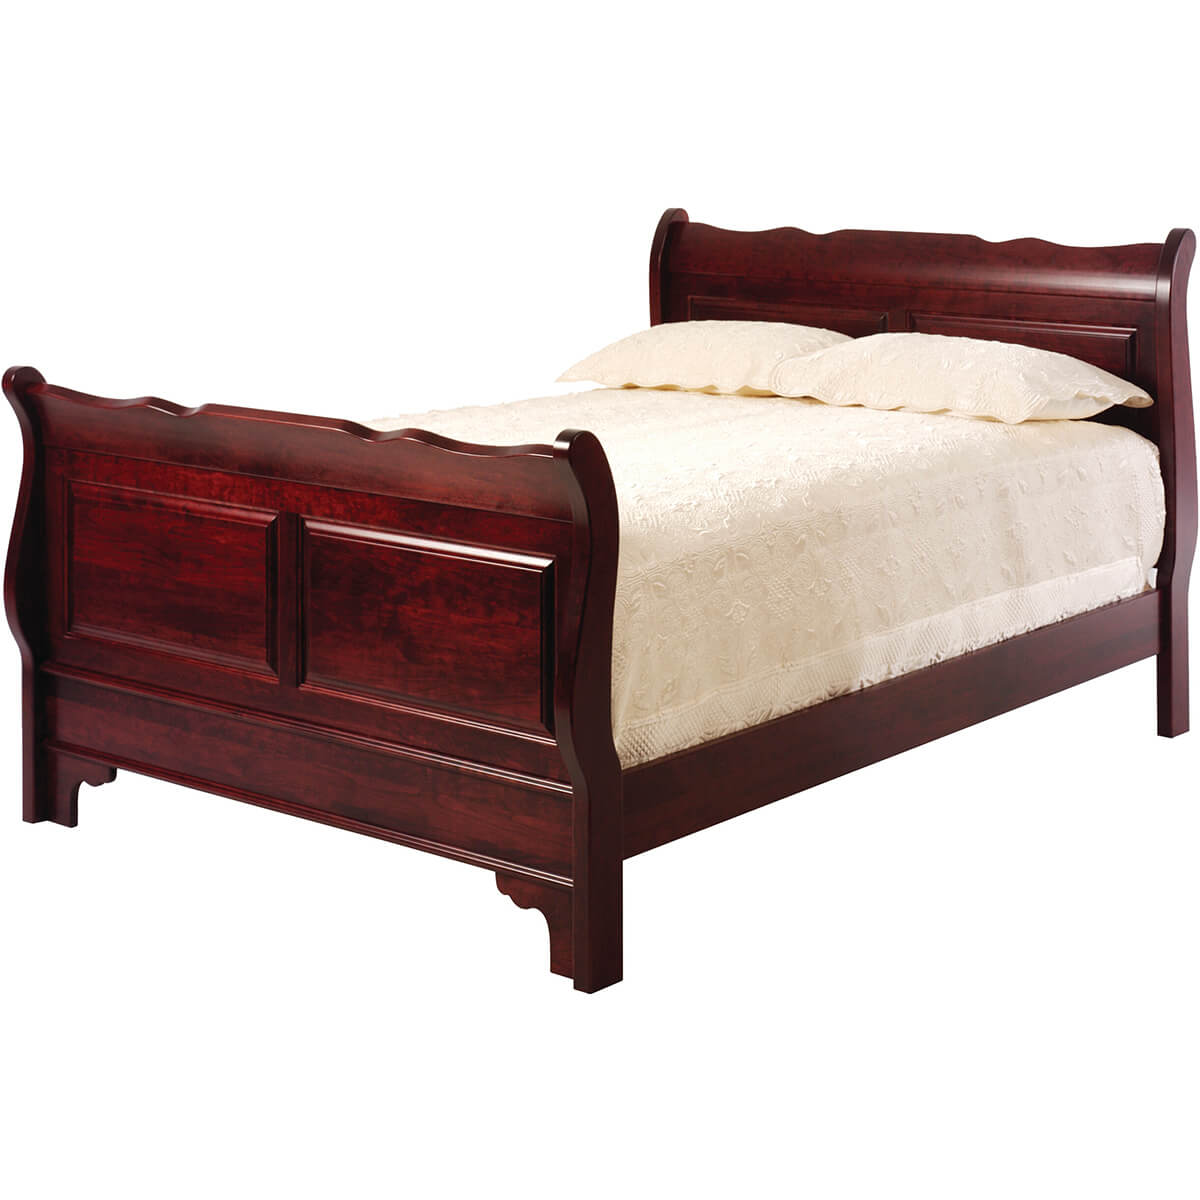 Read more about the article Elegant River Bend Sleigh Bed